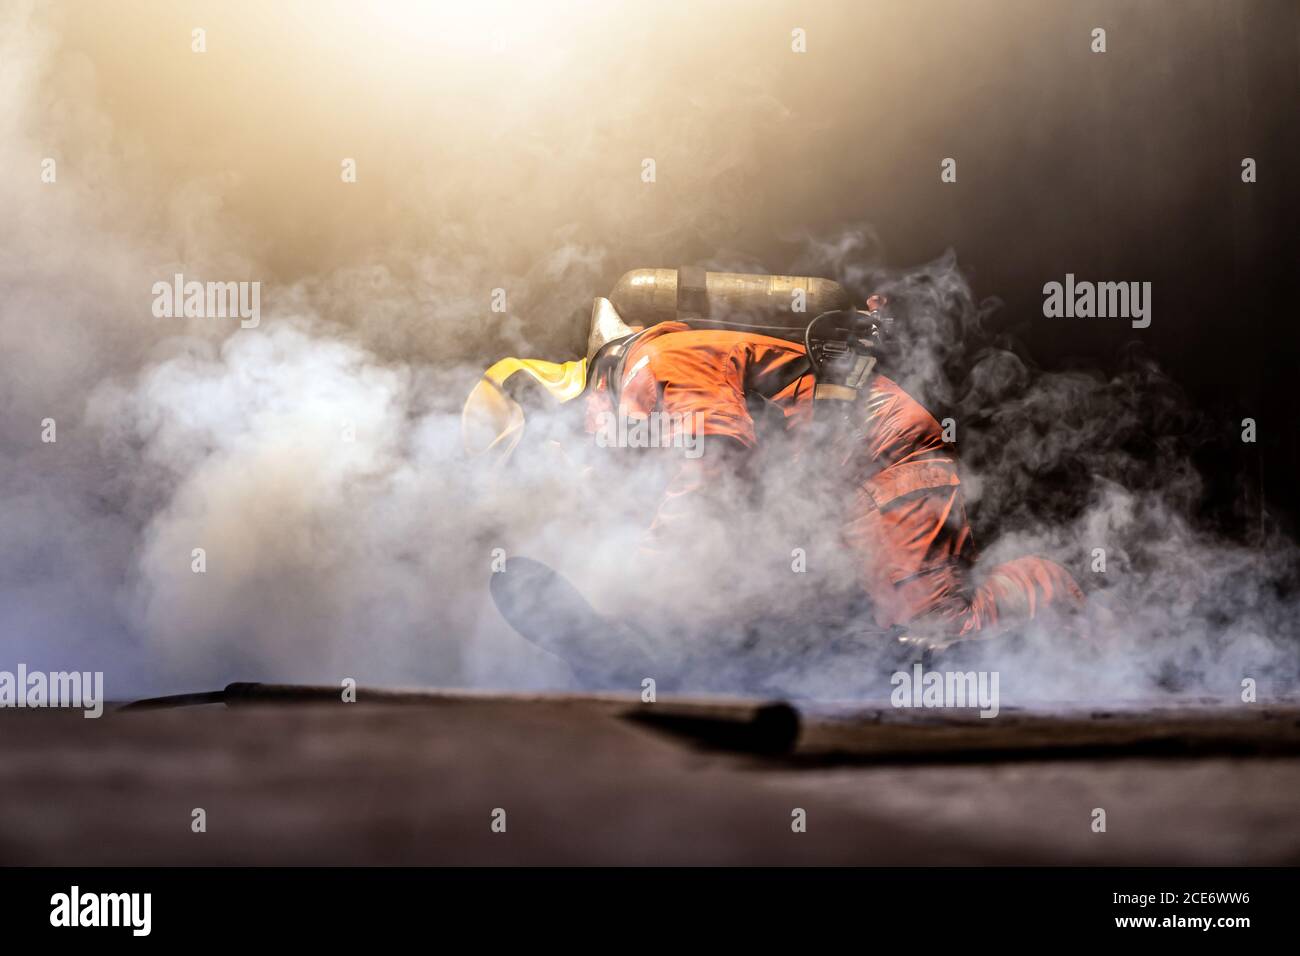 Firefighter rescue man from building on fire. Stock Photo